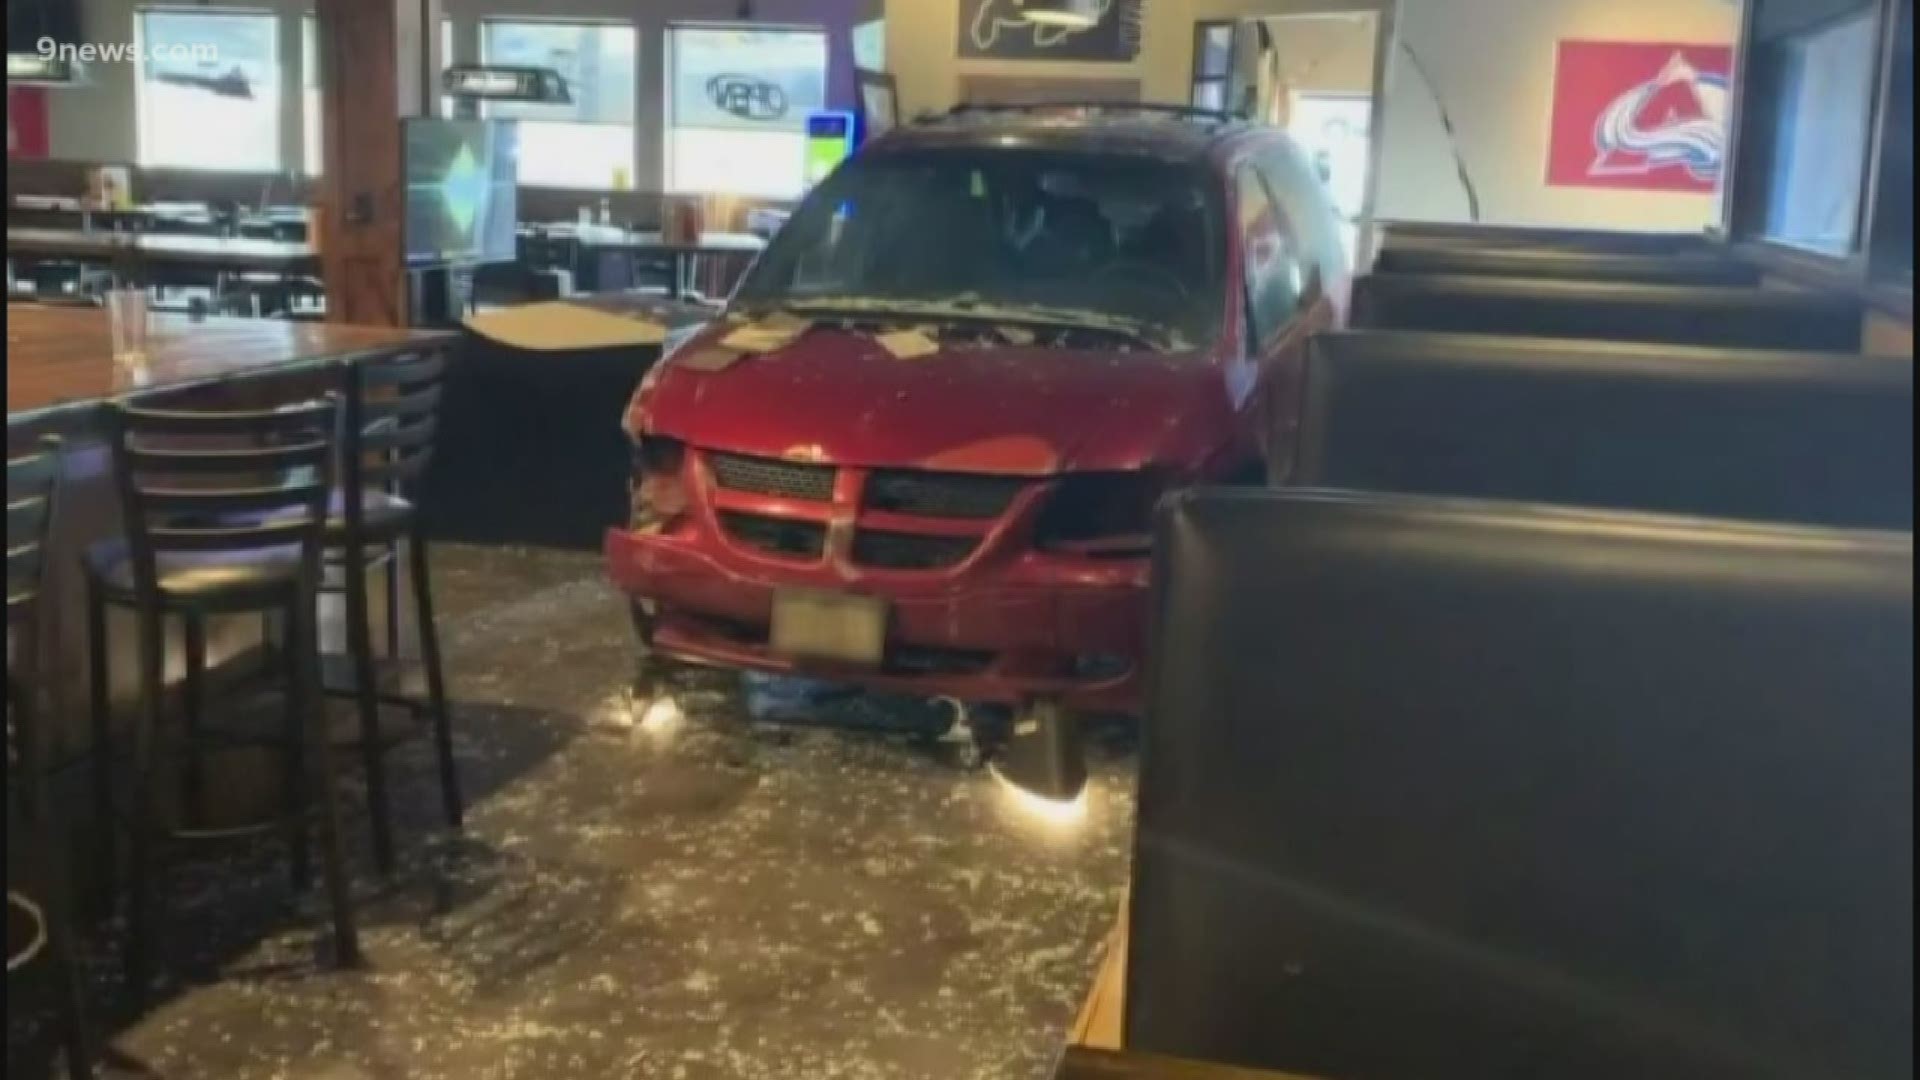 Two men slammed a stolen minivan into a Littleton business early Monday morning in an effort to burglarize it, according to police.